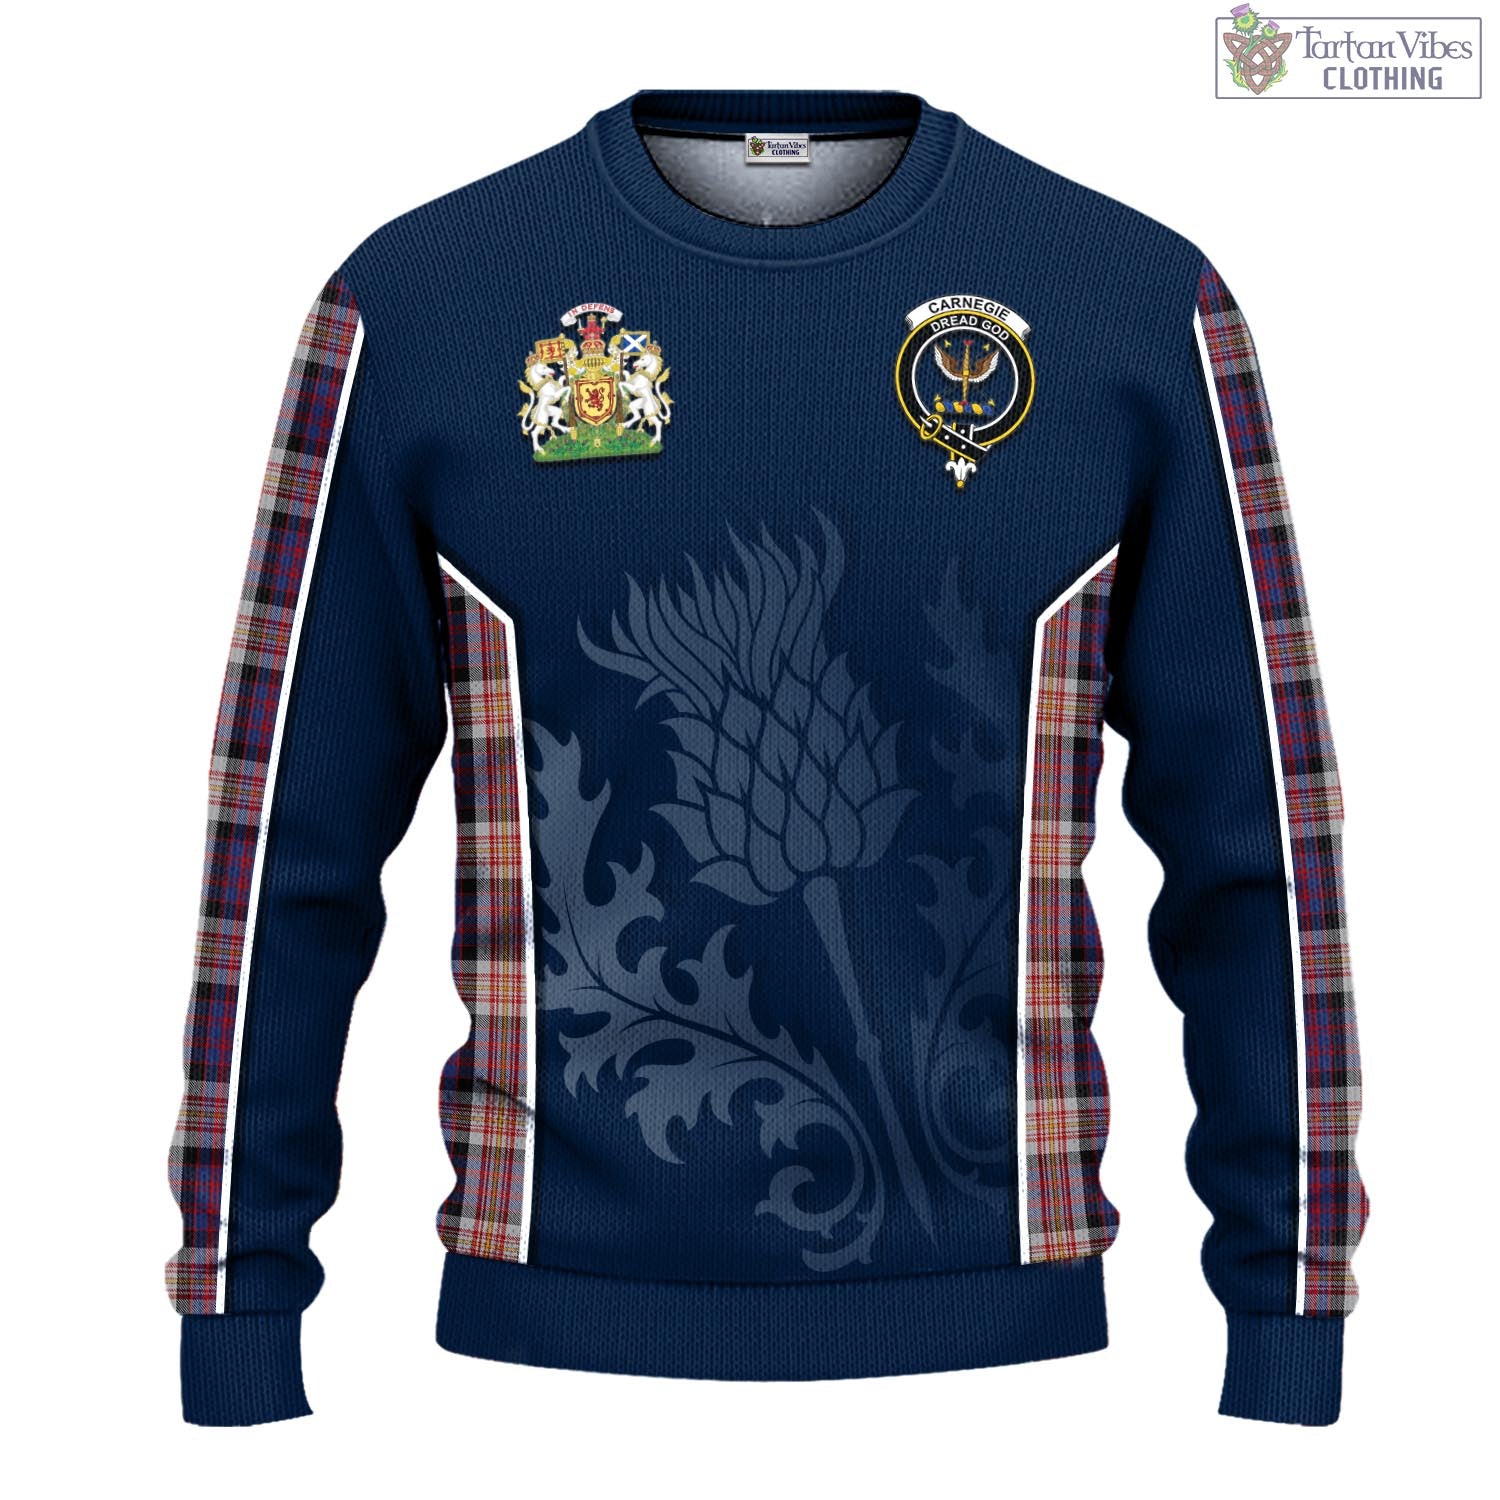 Tartan Vibes Clothing Carnegie Tartan Knitted Sweatshirt with Family Crest and Scottish Thistle Vibes Sport Style